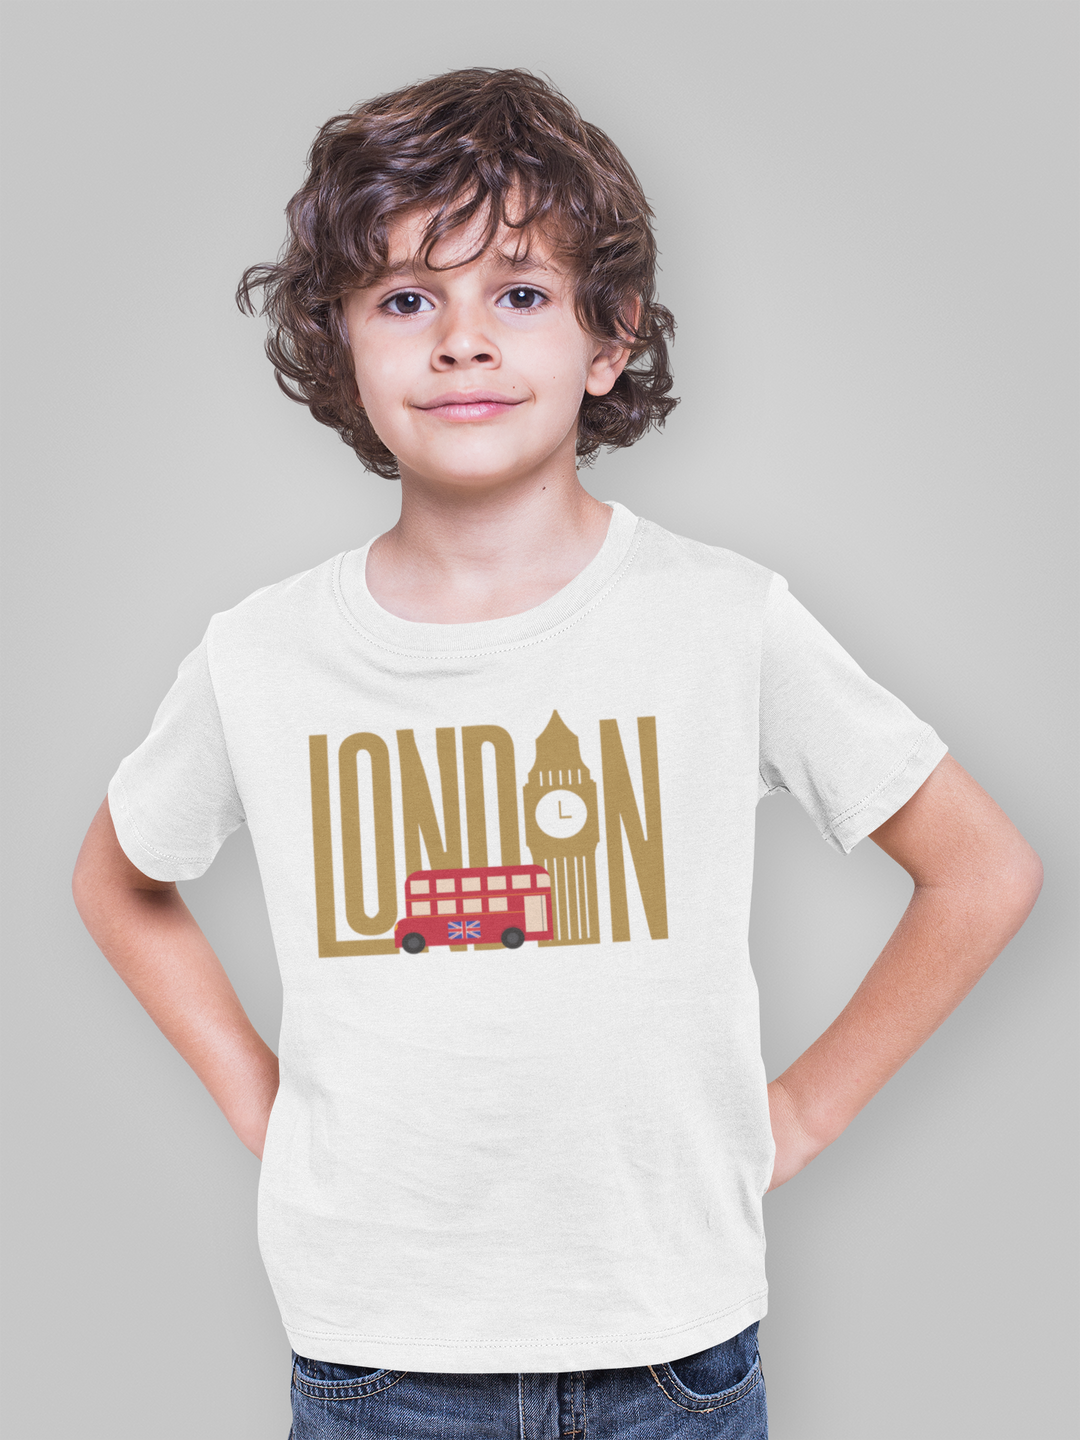 London. Brown letters. Short sleeve t shirt for toddler and kids. - TeesForToddlersandKids -  t-shirt - seasons, summer - london-brown-letters-short-sleeve-t-shirt-for-toddler-and-kids